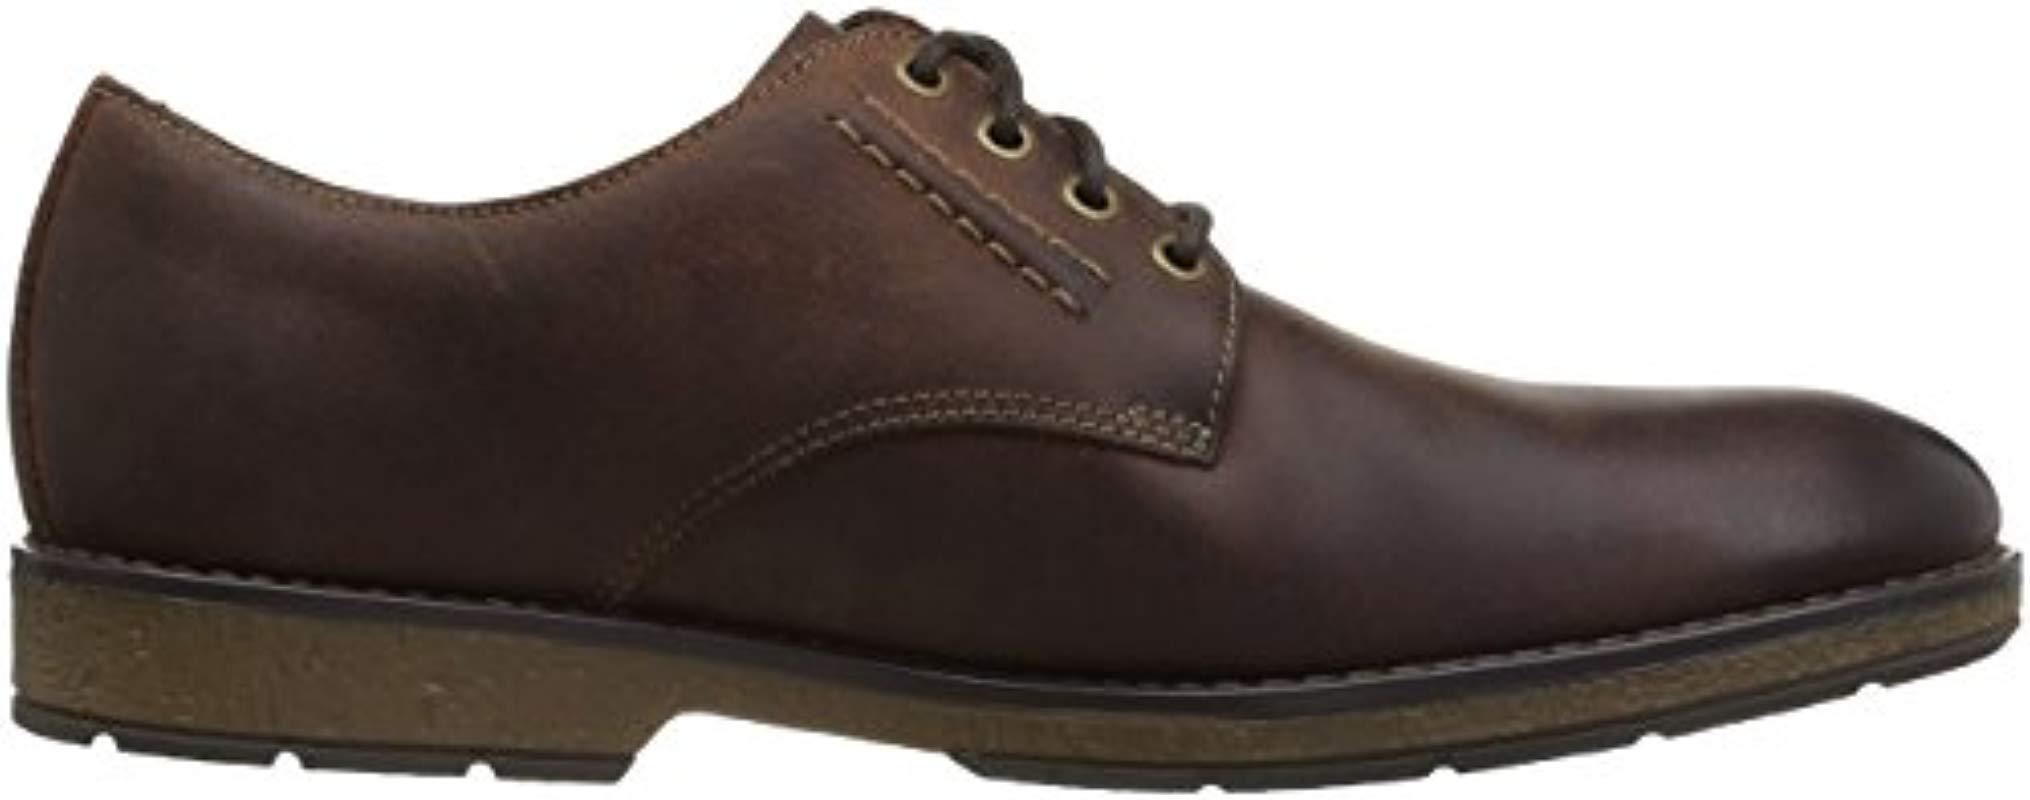 Clarks Leather Hinman Plain Oxford in 